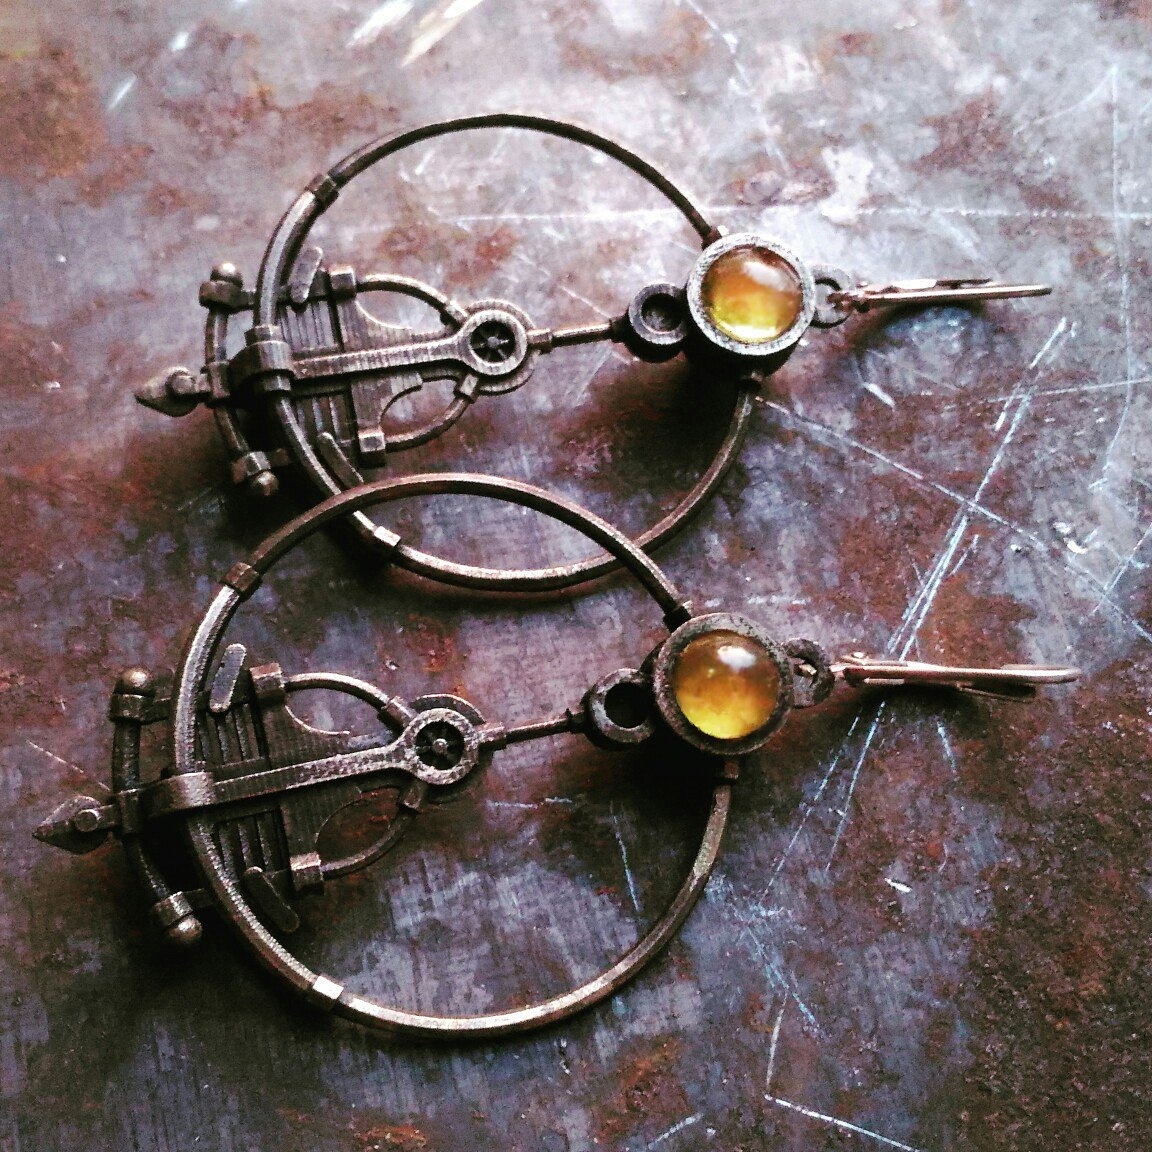 Industrial style jewelry. - Longpost, Decoration, Amber, Jewelry, beauty, Industry, Factory, My